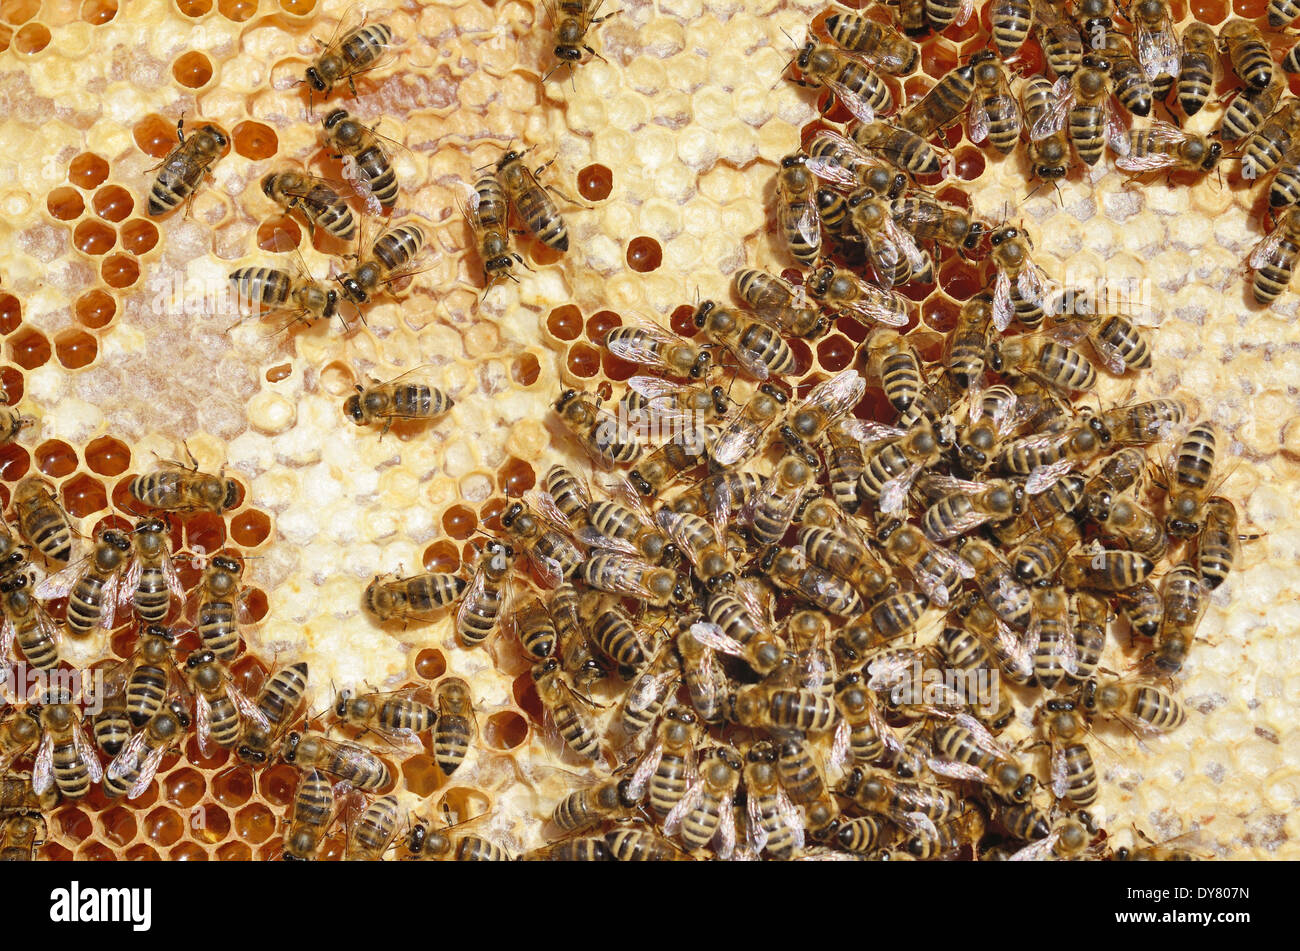 Honey Bees (Apis mellifera) on a honeycomb with partially capped cells Stock Photo